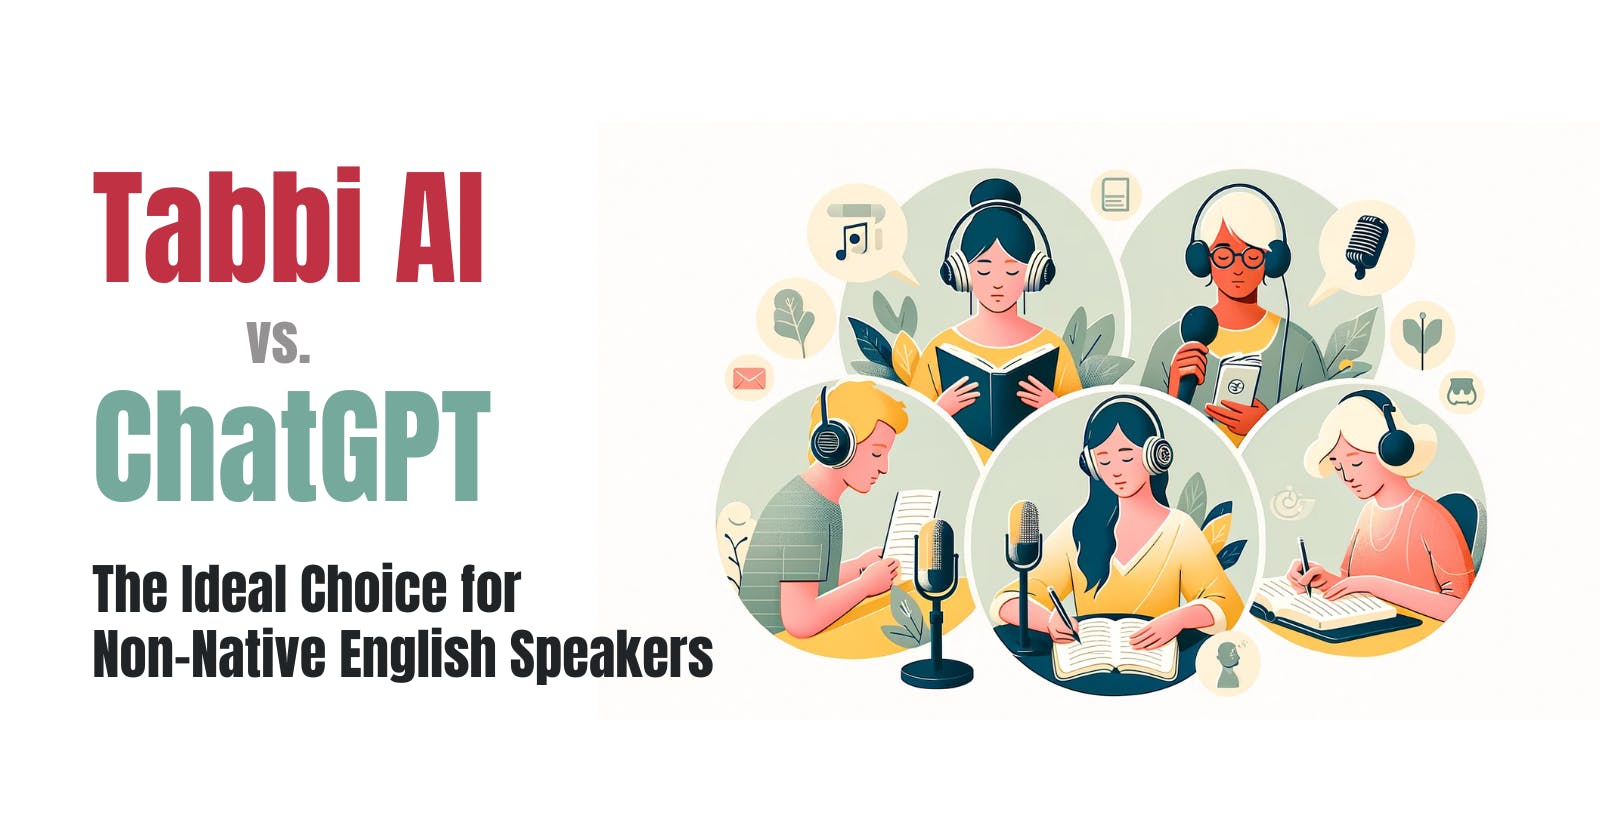 Tabbi AI vs. ChatGPT: The Ideal Choice for Non-Native English Speakers